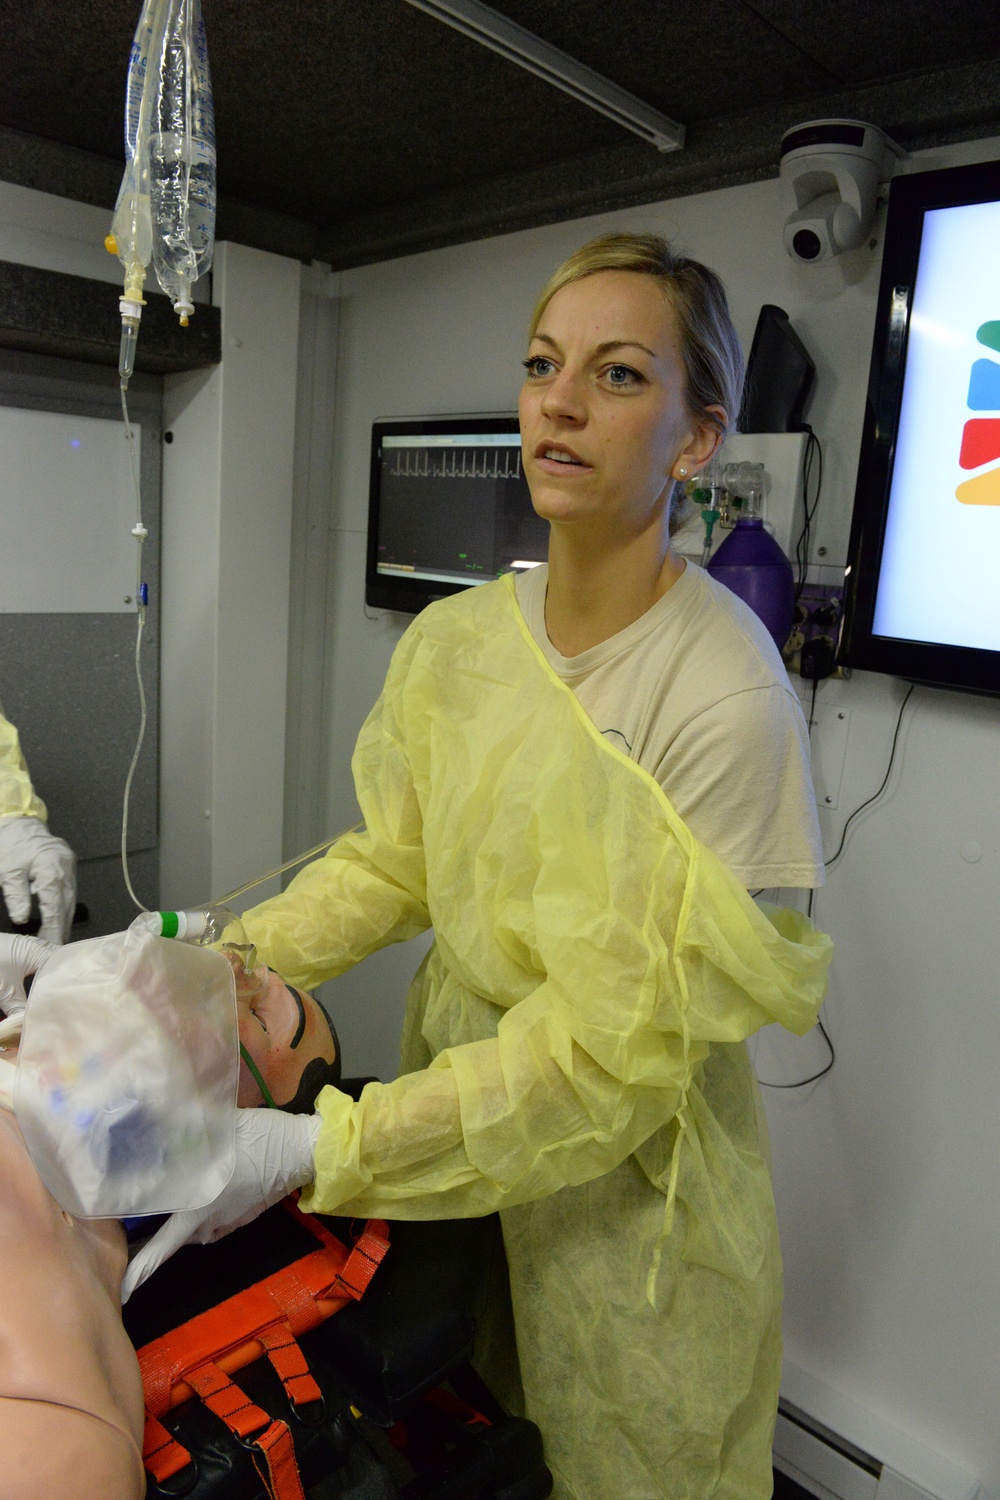 119th Wing personnel utilize high-tech mannequin for medical training